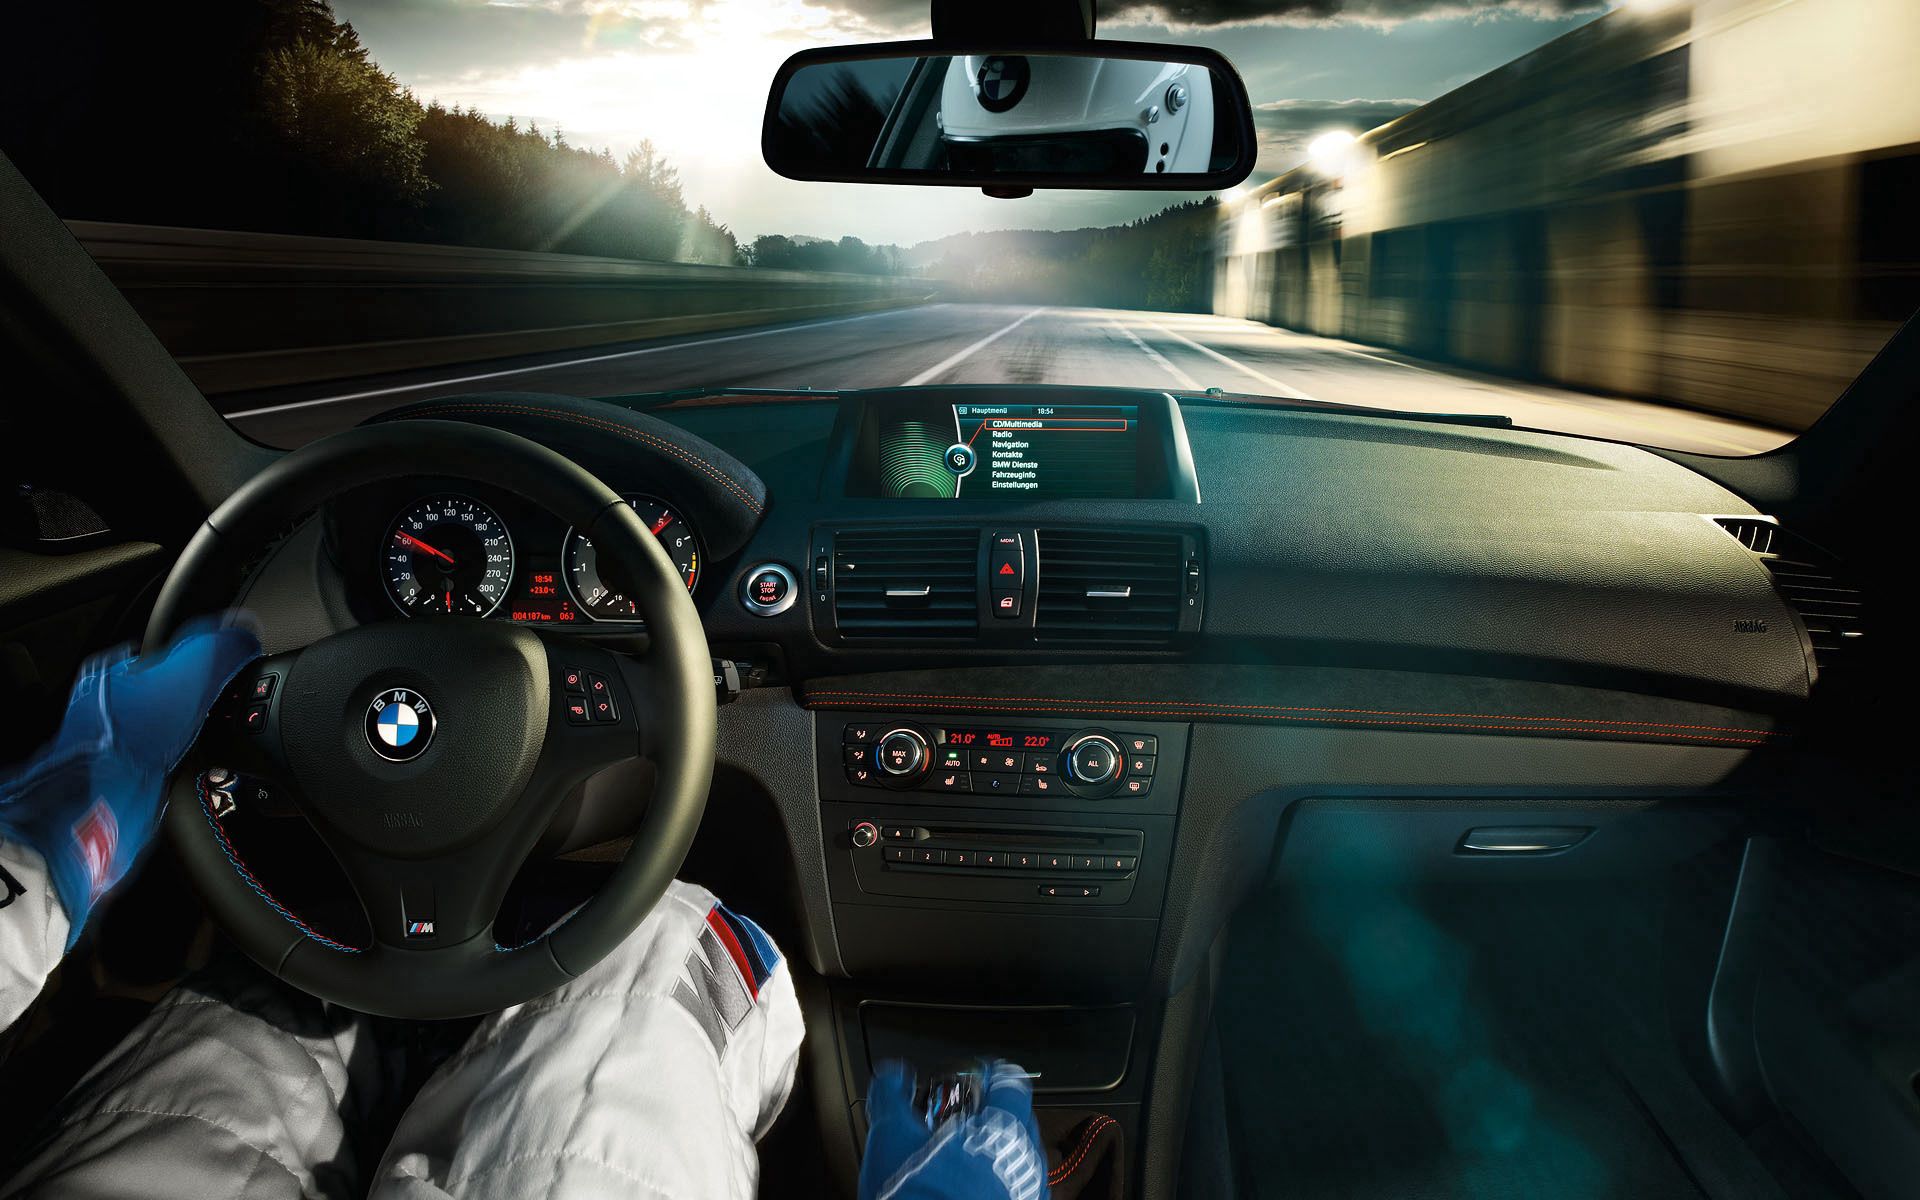 salon, bmw, sports, speed, track, racer, route